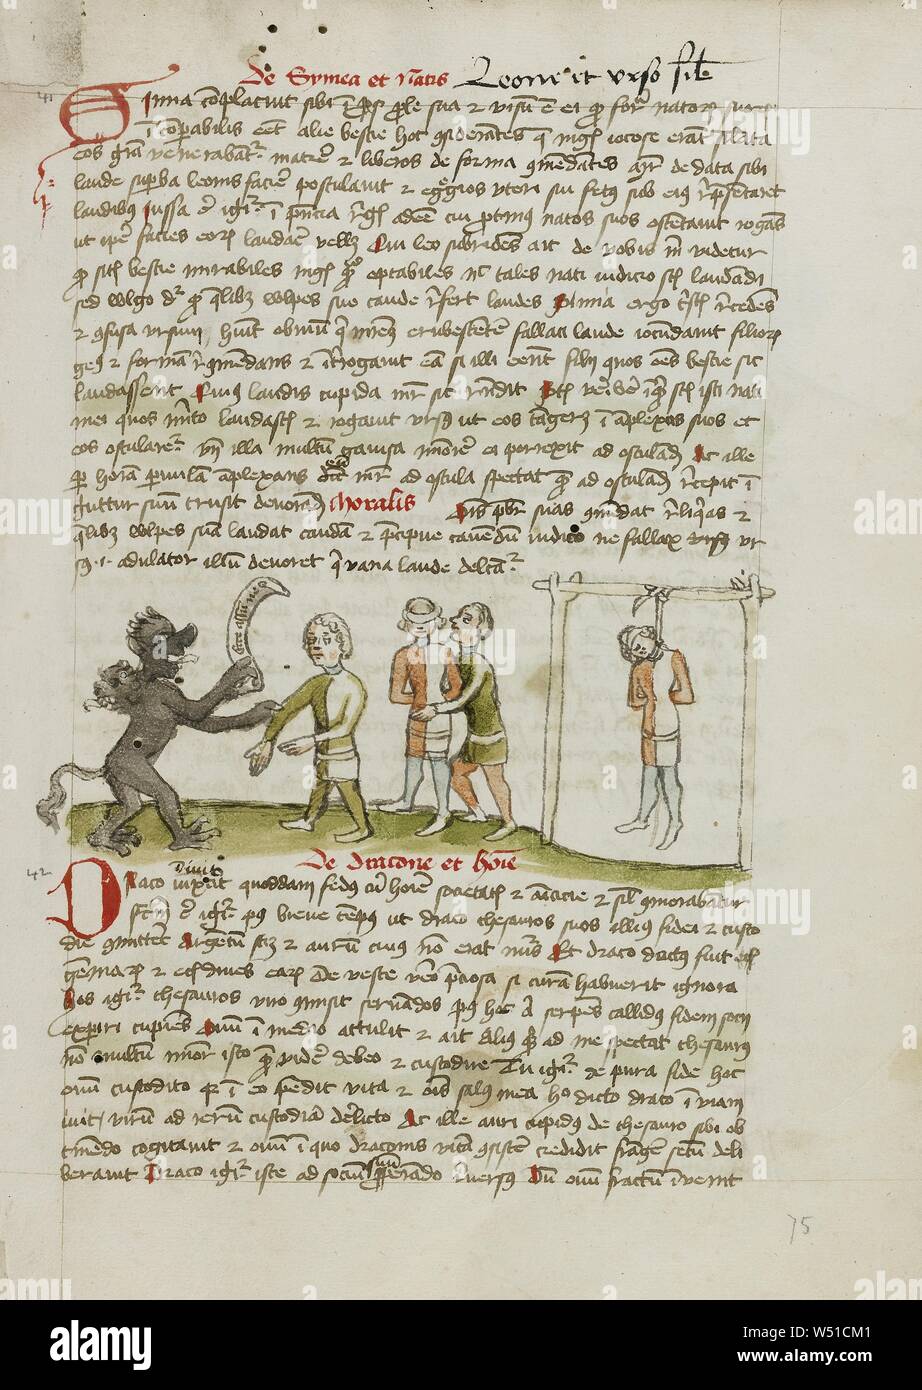 The Devil with a Man Wearing a Blindfold, The Man Hanging from a Nearby Tree, Unknown, Trier (probably), Germany, third quarter of 15th century, Pen and black ink and colored washes on paper, Leaf: 28.7 x 20.6 cm (11 5/16 x 8 1/8 in Stock Photo